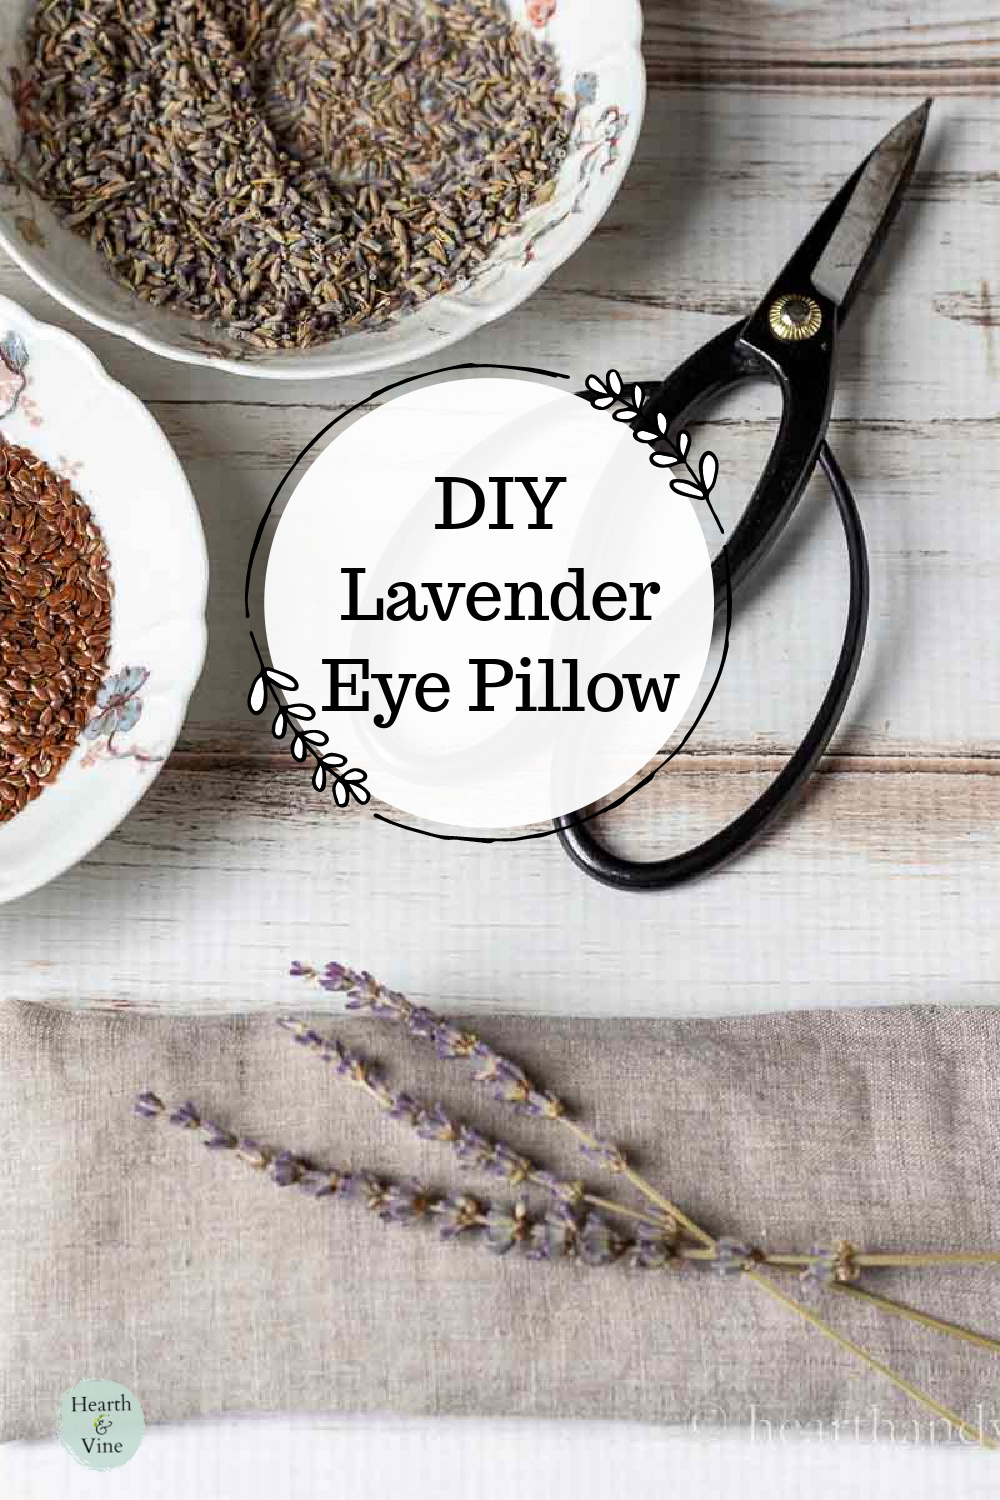 A lavender eye pillow, scissors and bowls of flaxseed and lavender buds.